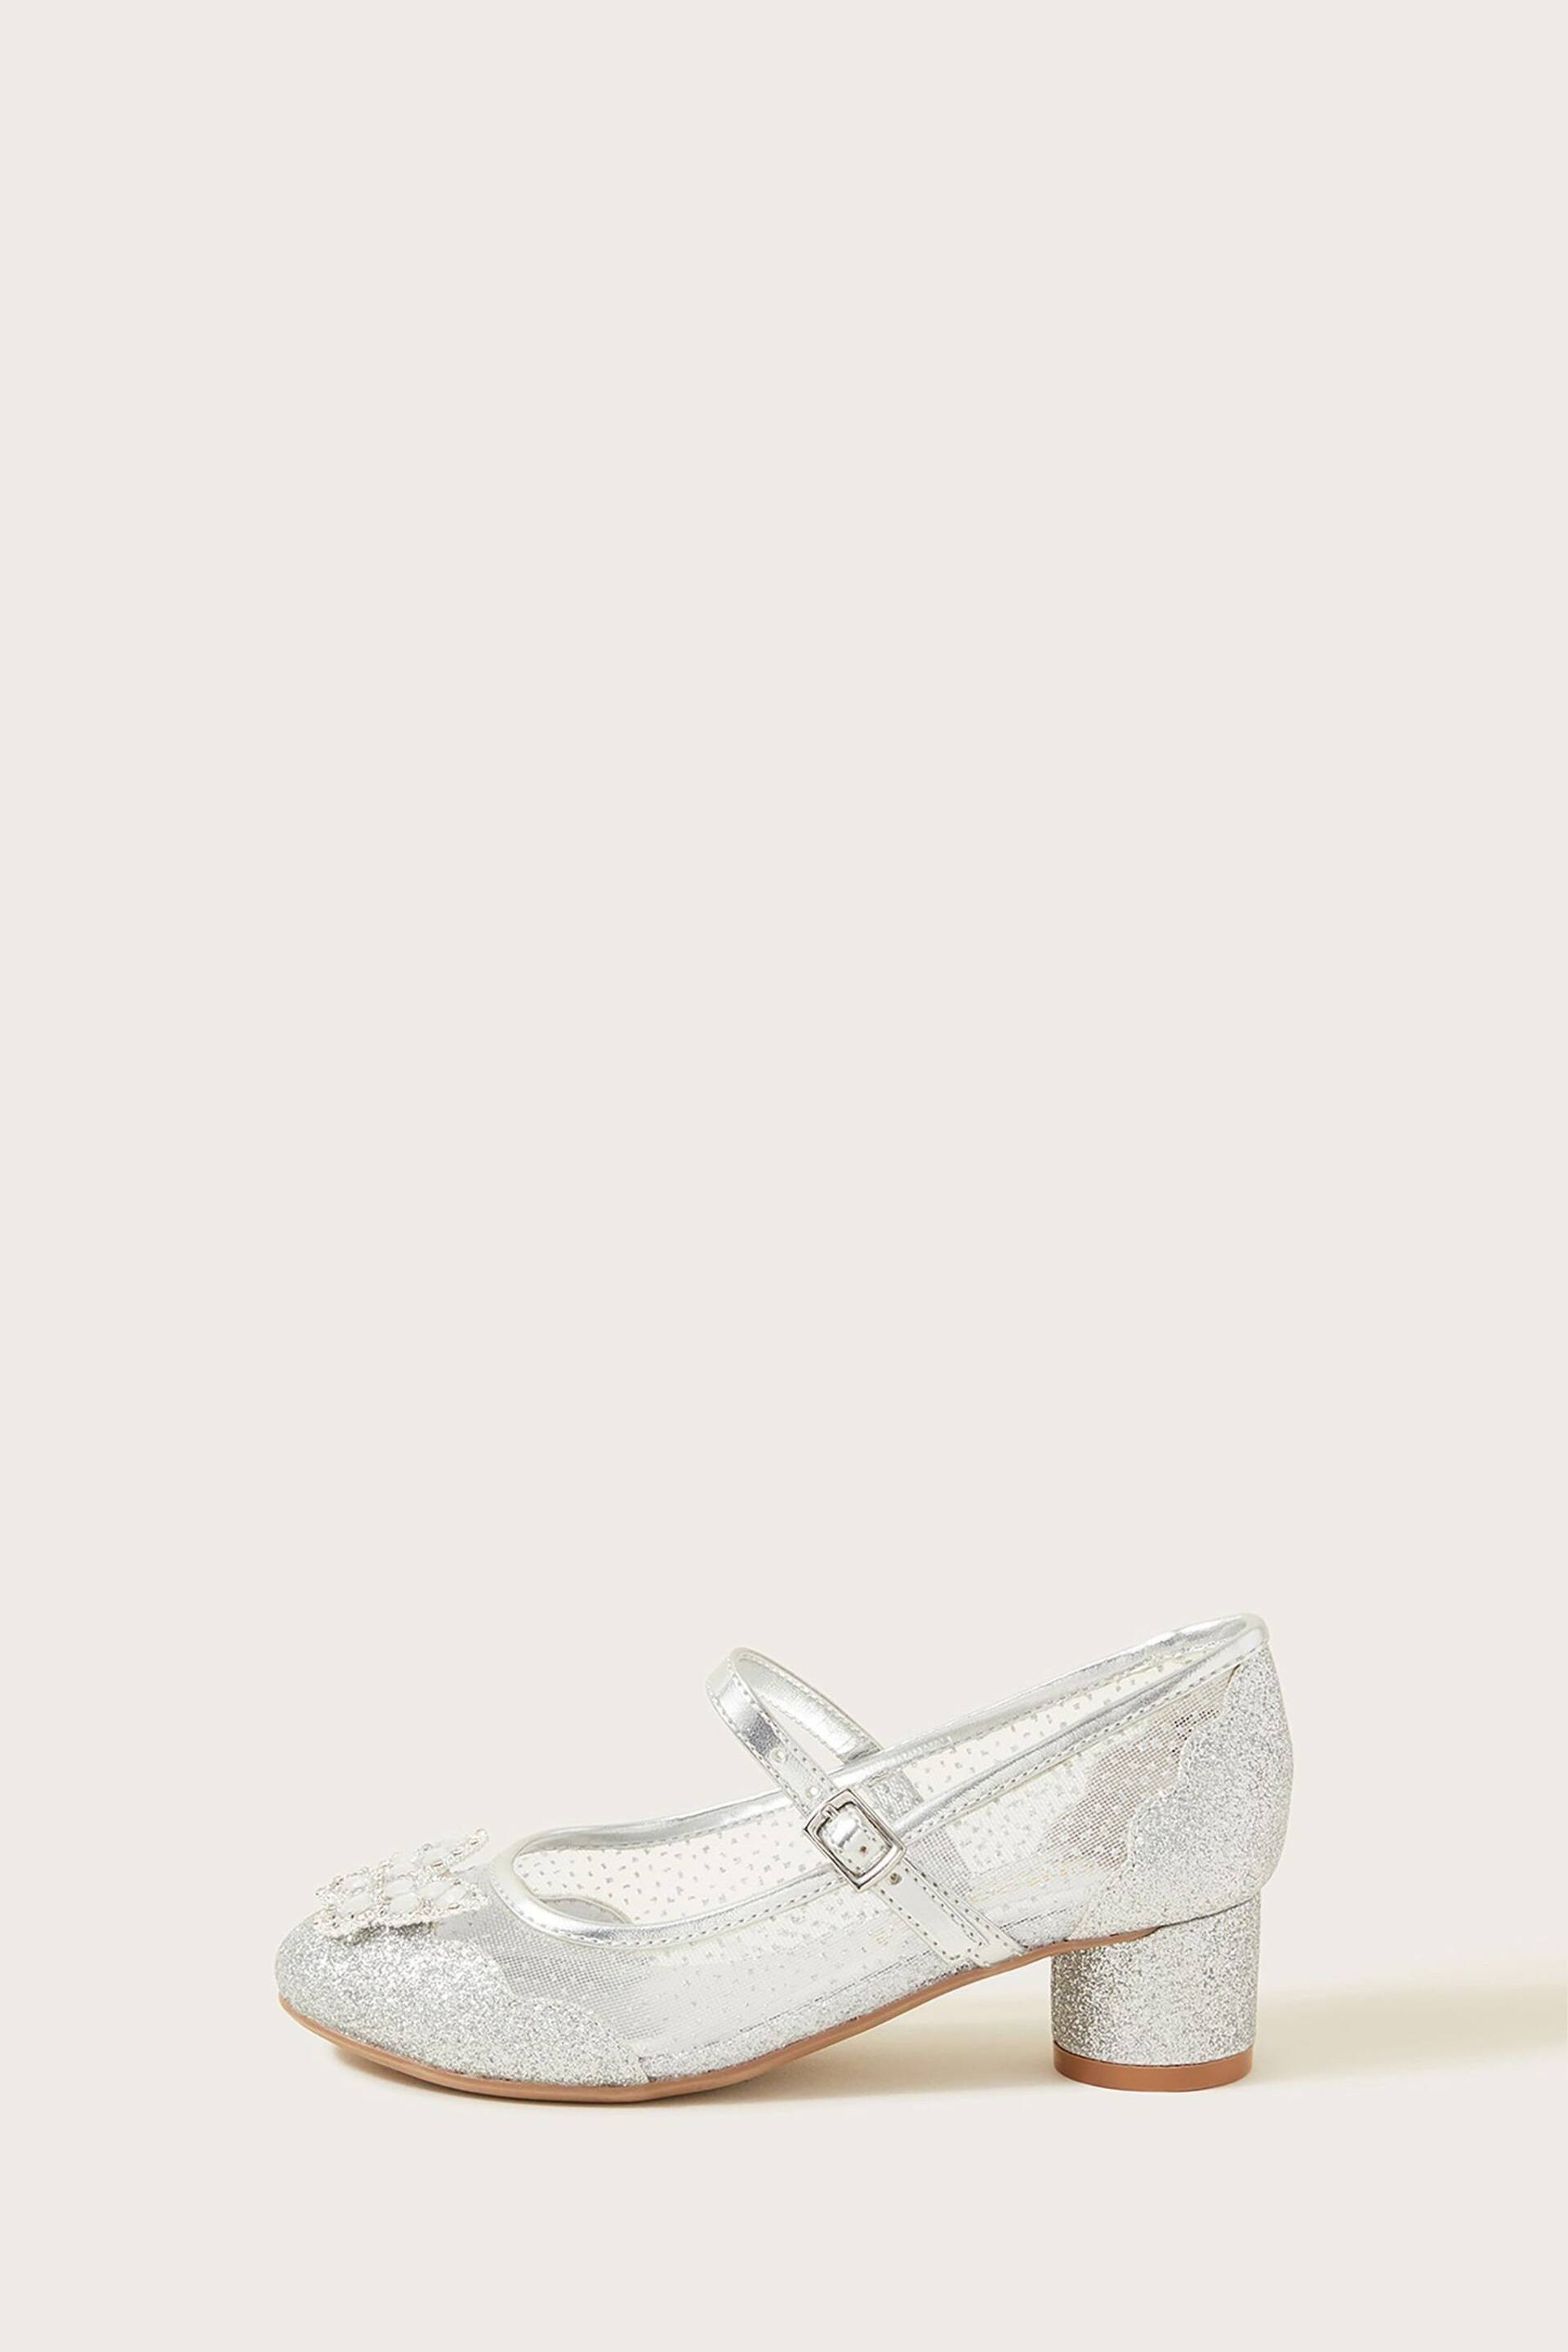 Monsoon Silver Princess Butterfly Heels - Image 1 of 3